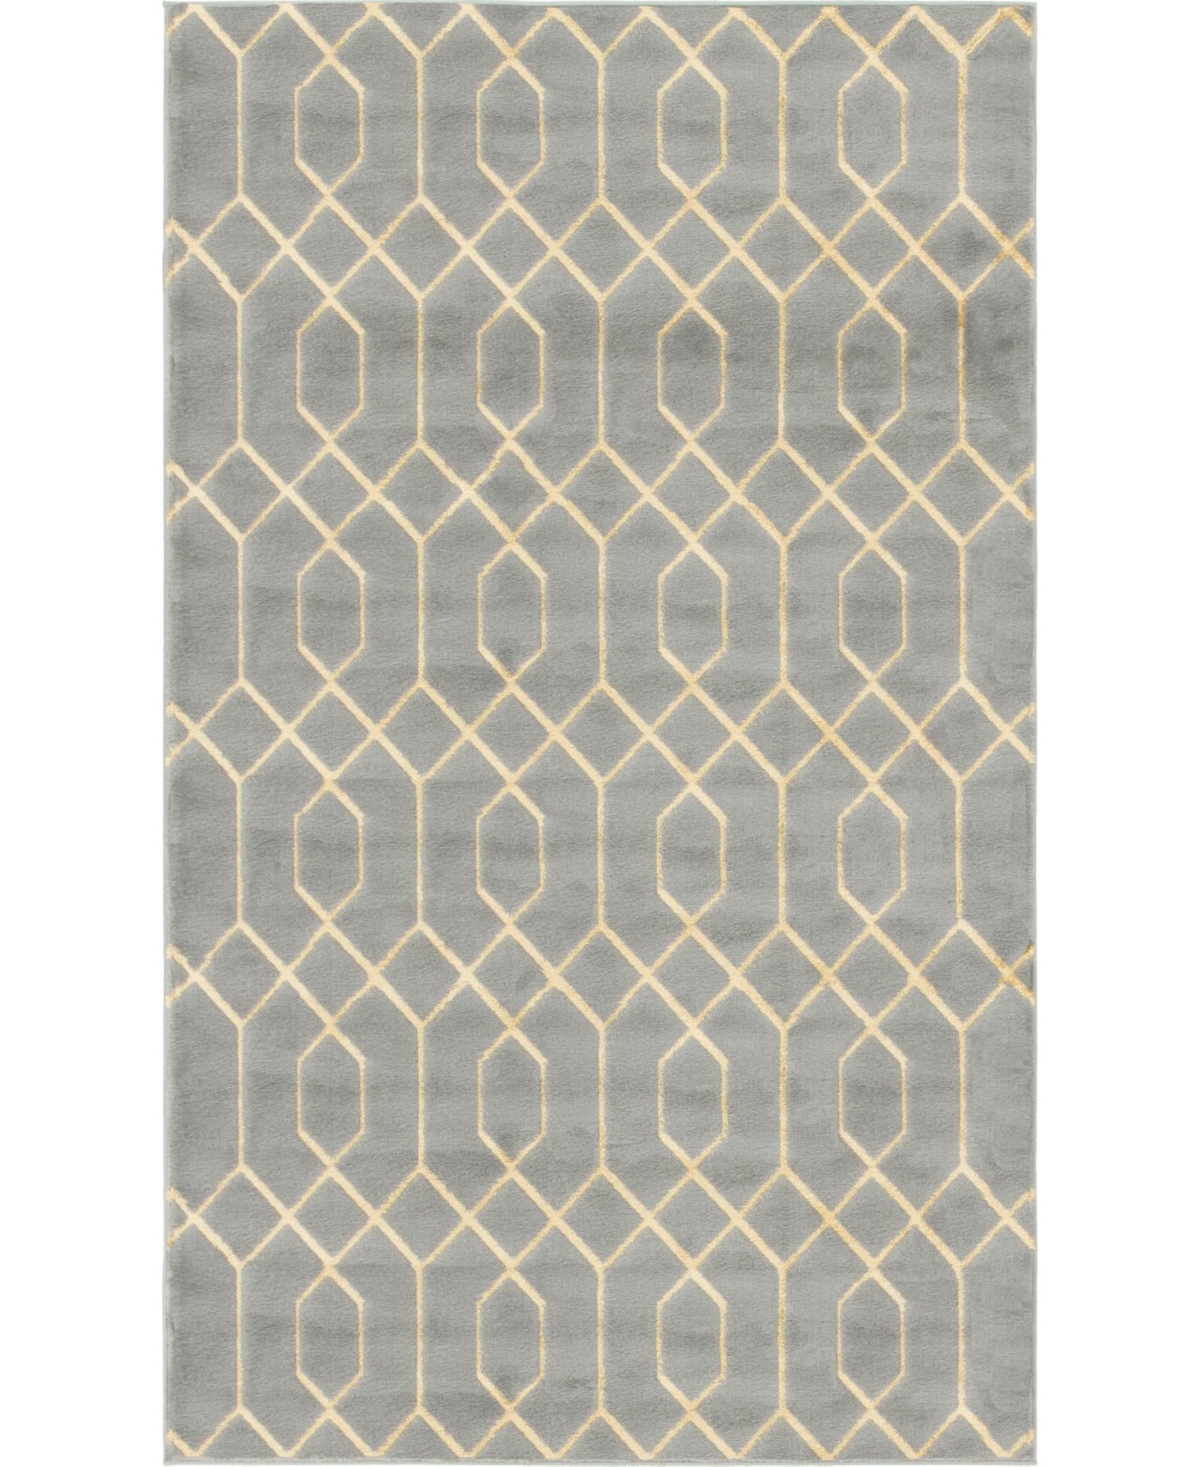 Marilyn Monroe Glam Mmg001 5' X 8' Area Rug In Gray Gold